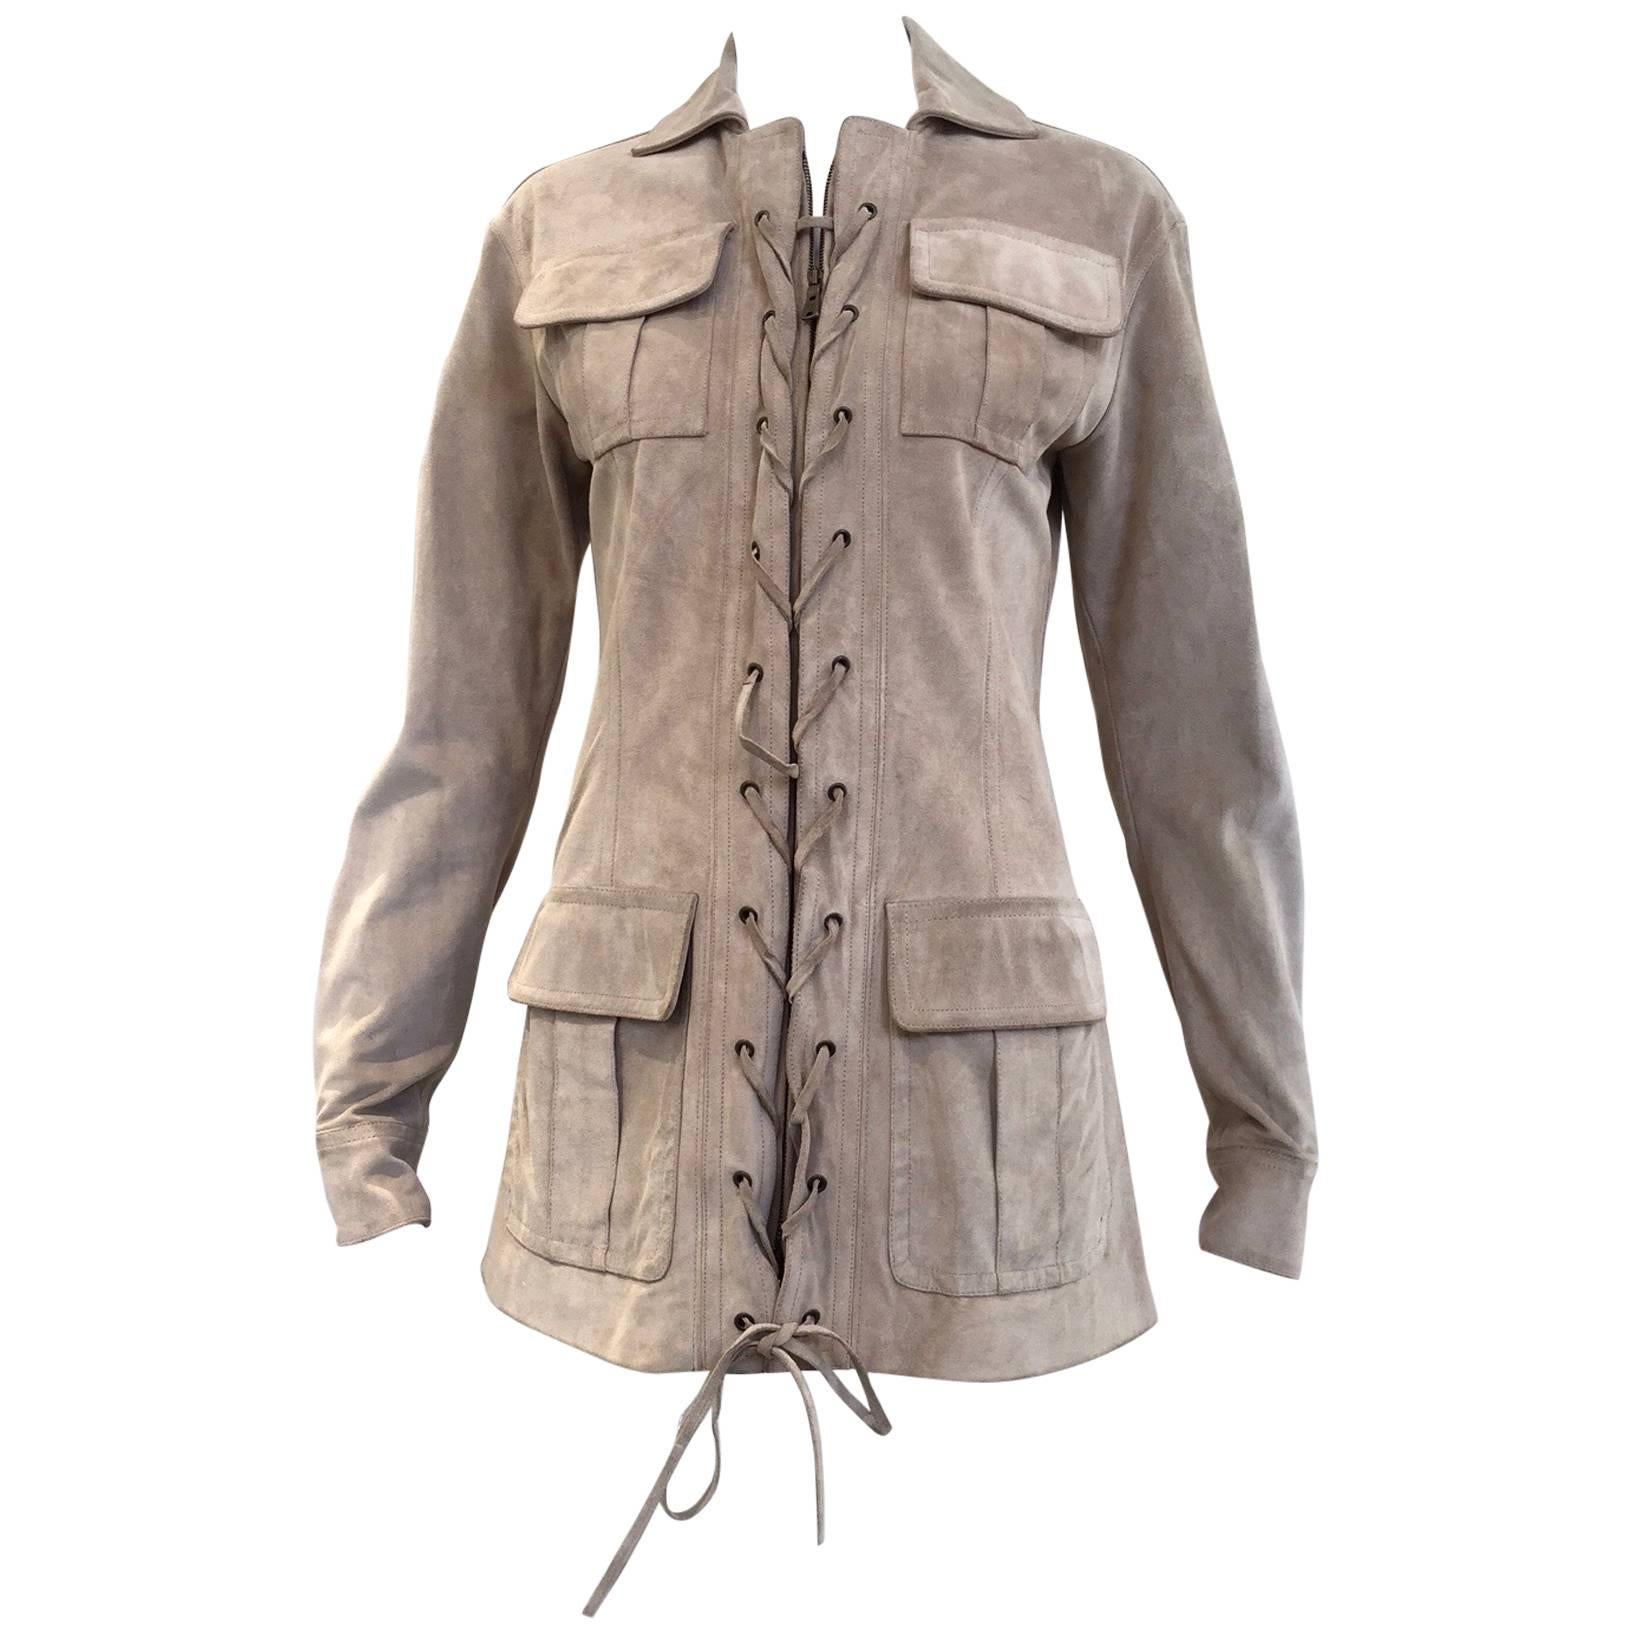 Yves Saint Laurent by Tom Ford suede safari jacket